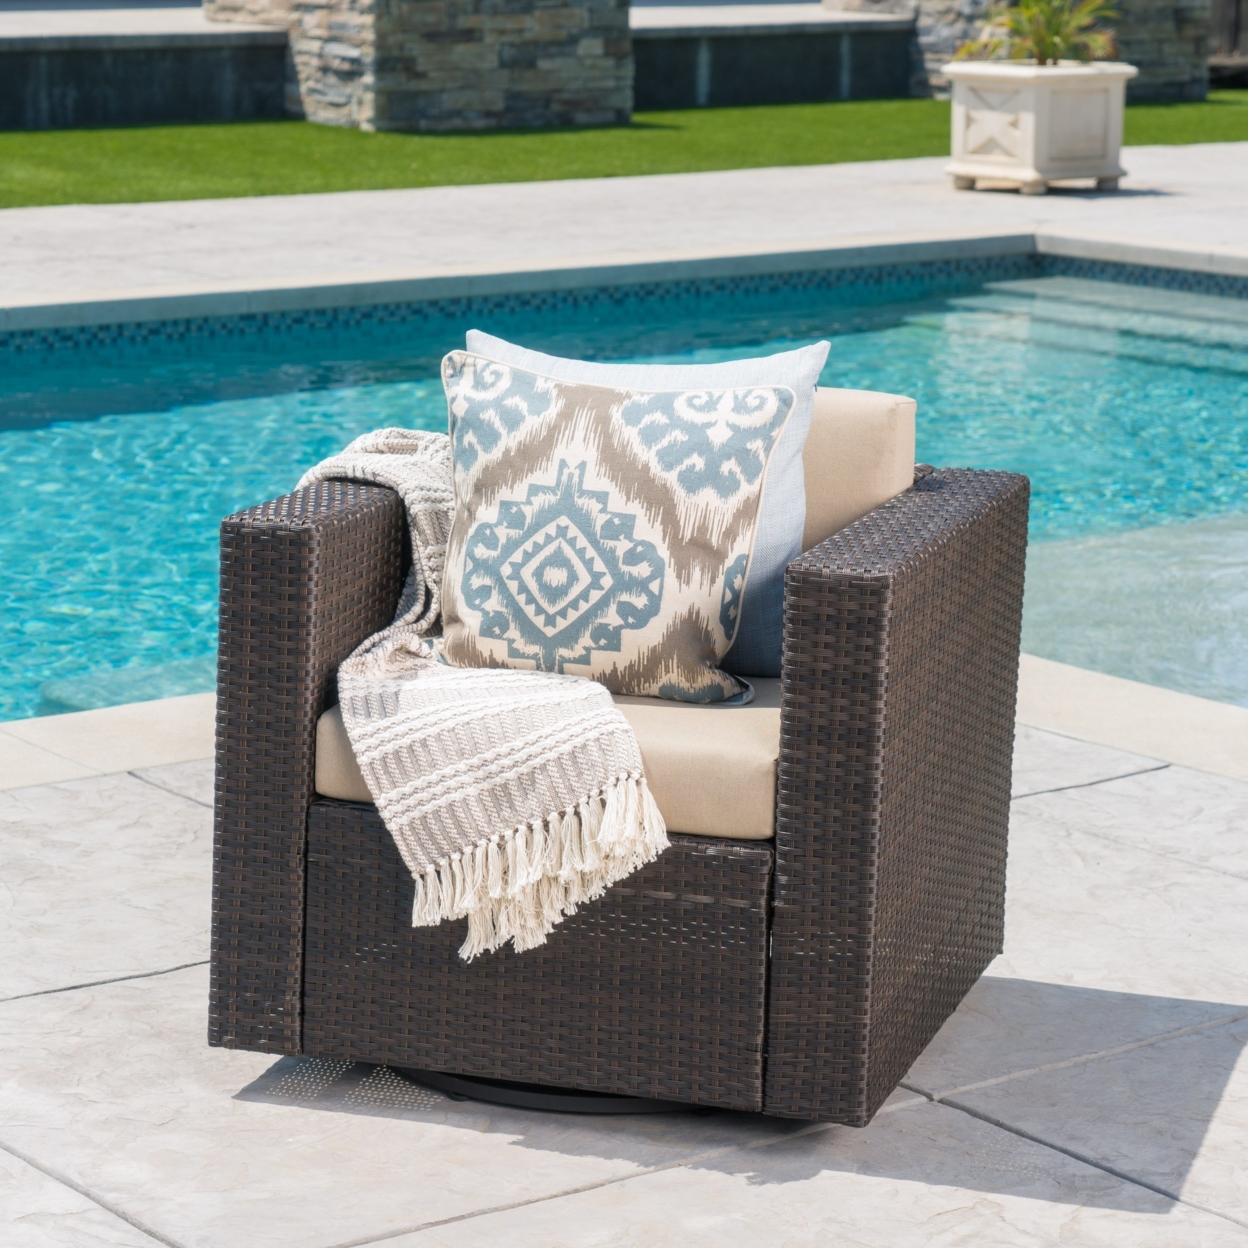 Venice Outdoor Wicker Swivel Club Chair With Water Resistant Cushions - Mix Black/dark Gray, Single